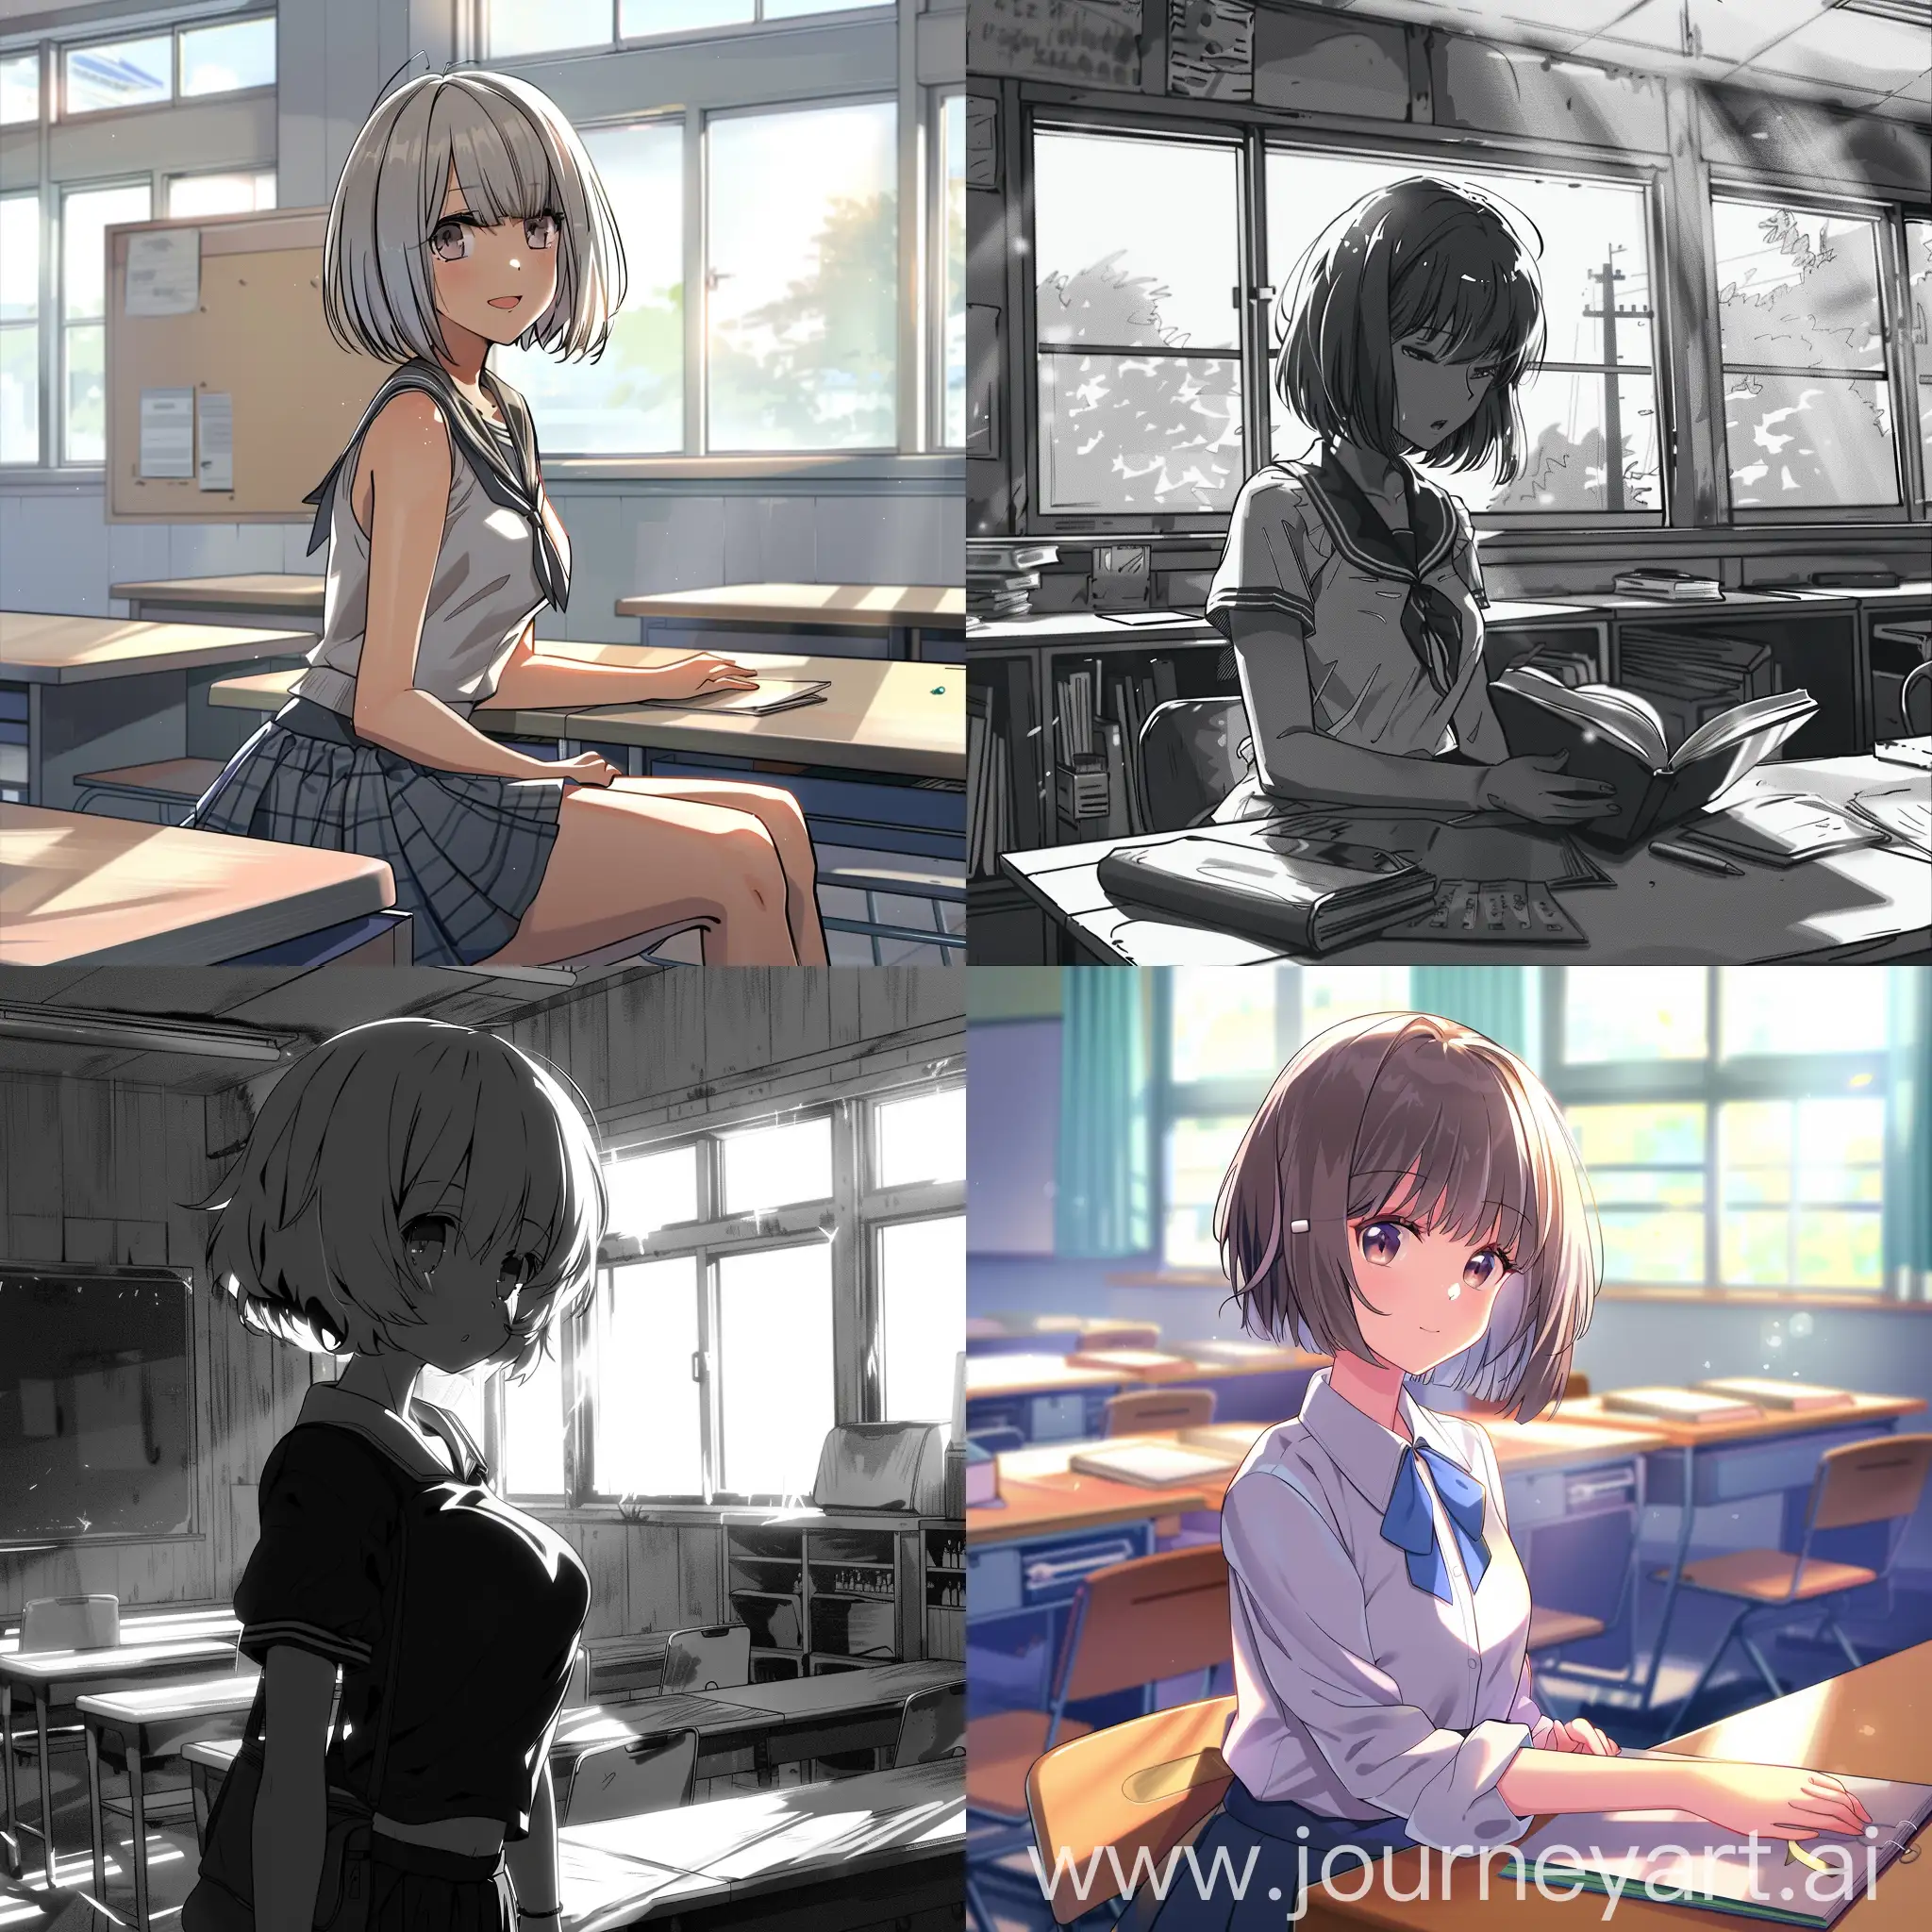 ShortHaired-Girl-in-Classroom-Confident-Student-Portrait